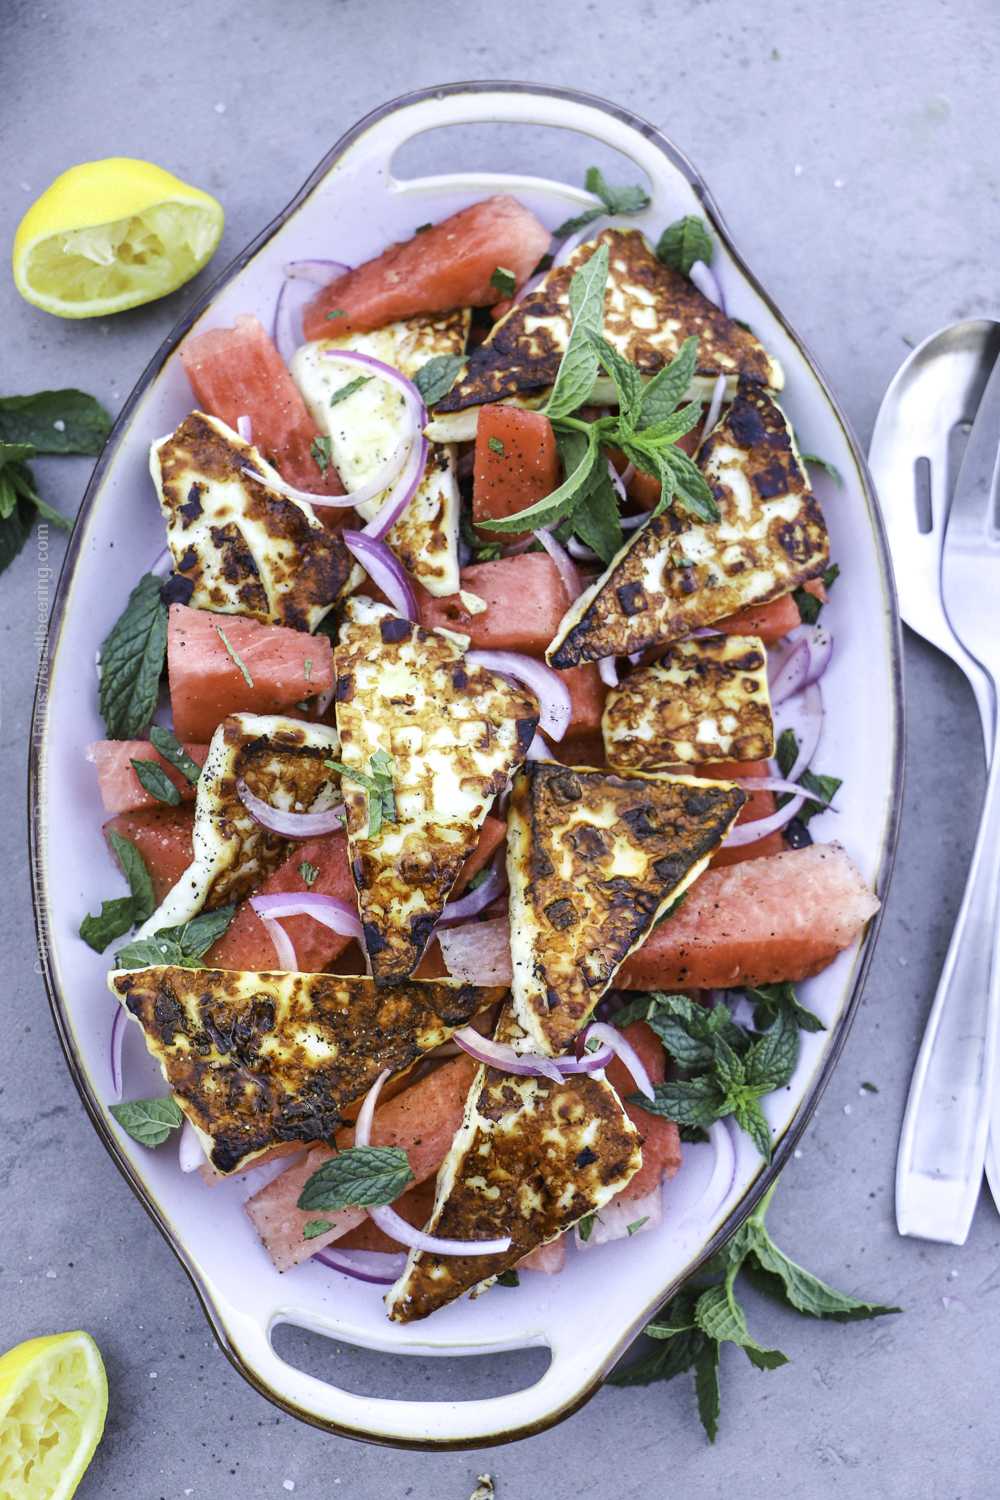 Grilled halloumi cheese salad with feta and mint